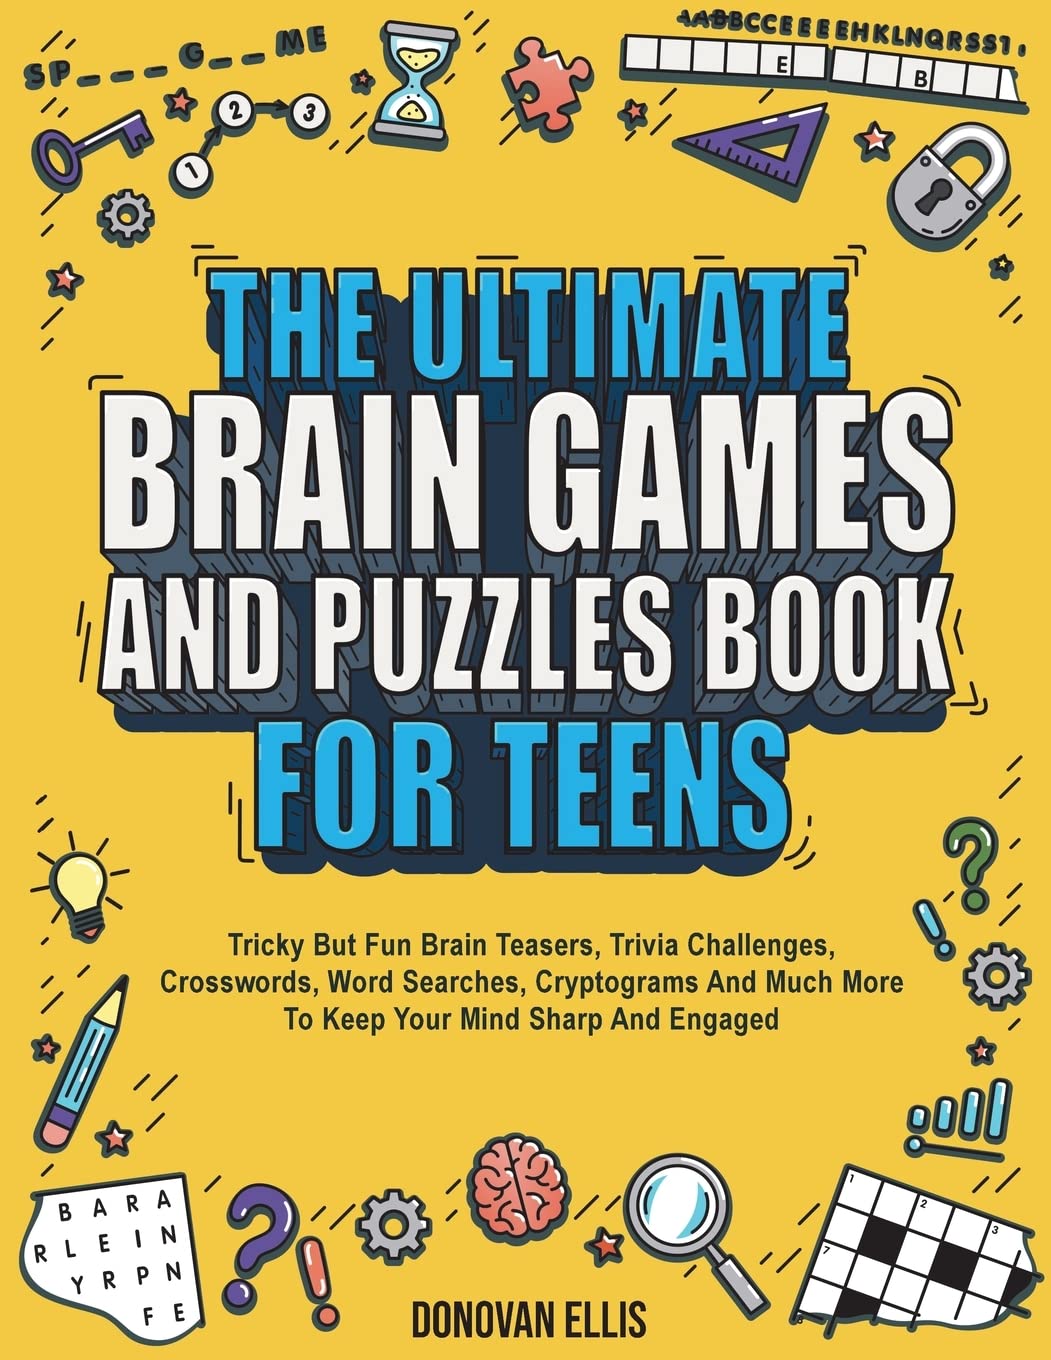 The Ultimate Brain Games And Puzzles Book For Teens: Tricky But Fun Brain Teasers, Trivia Challenges, Crosswords, Word Searches, Cryptograms And Much More To Keep Your Mind Sharp And Engaged